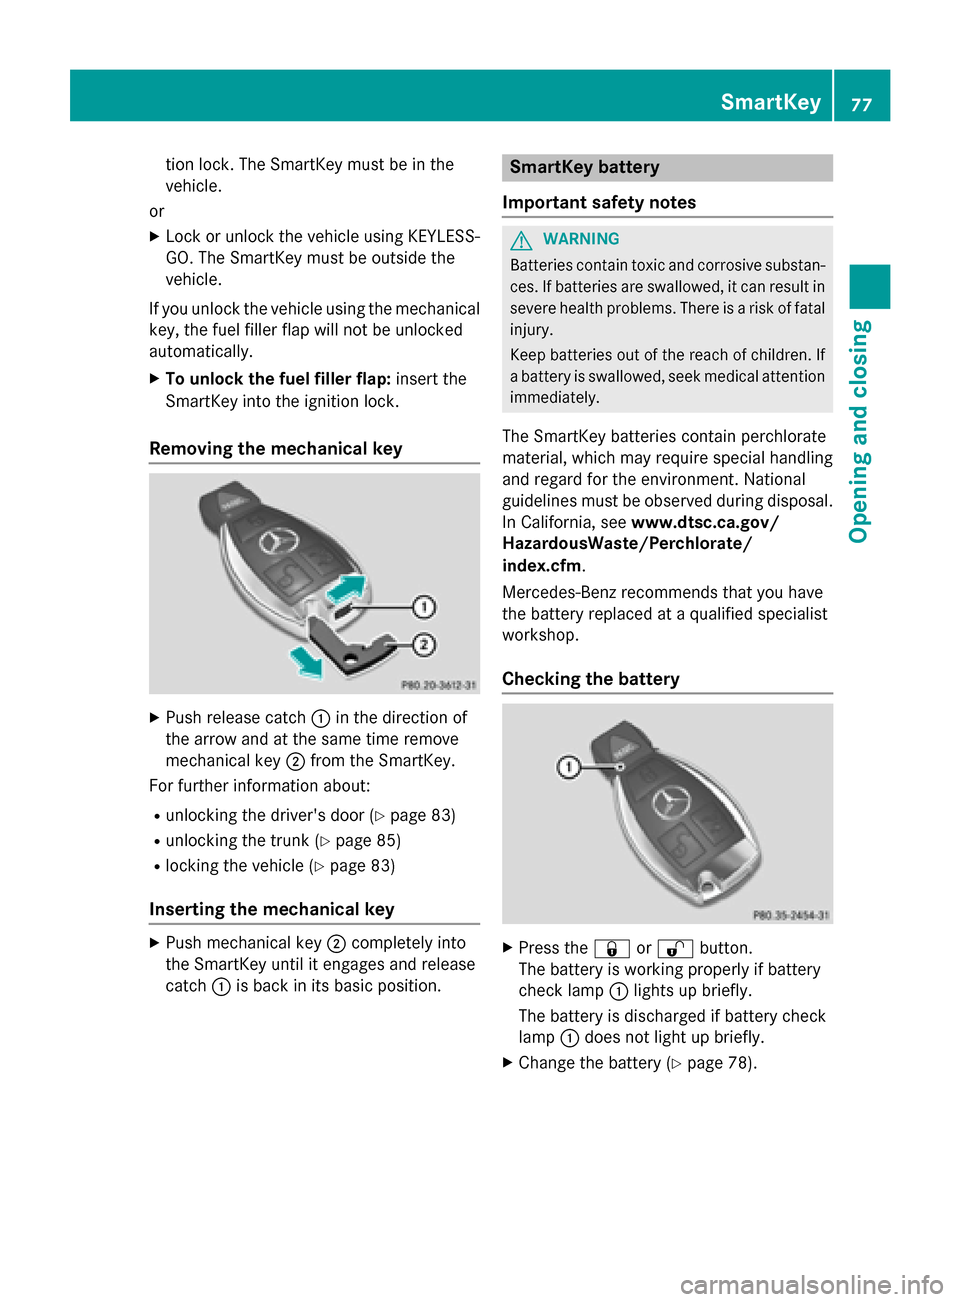 MERCEDES-BENZ CLA-Class 2015 C117 Owners Manual tion lock. The SmartKey must be in the
vehicle.
or
X Lock or unlock the vehicle using KEYLESS-
GO. The SmartKey must be outside the
vehicle.
If you unlock the vehicle using the mechanical key, the fue